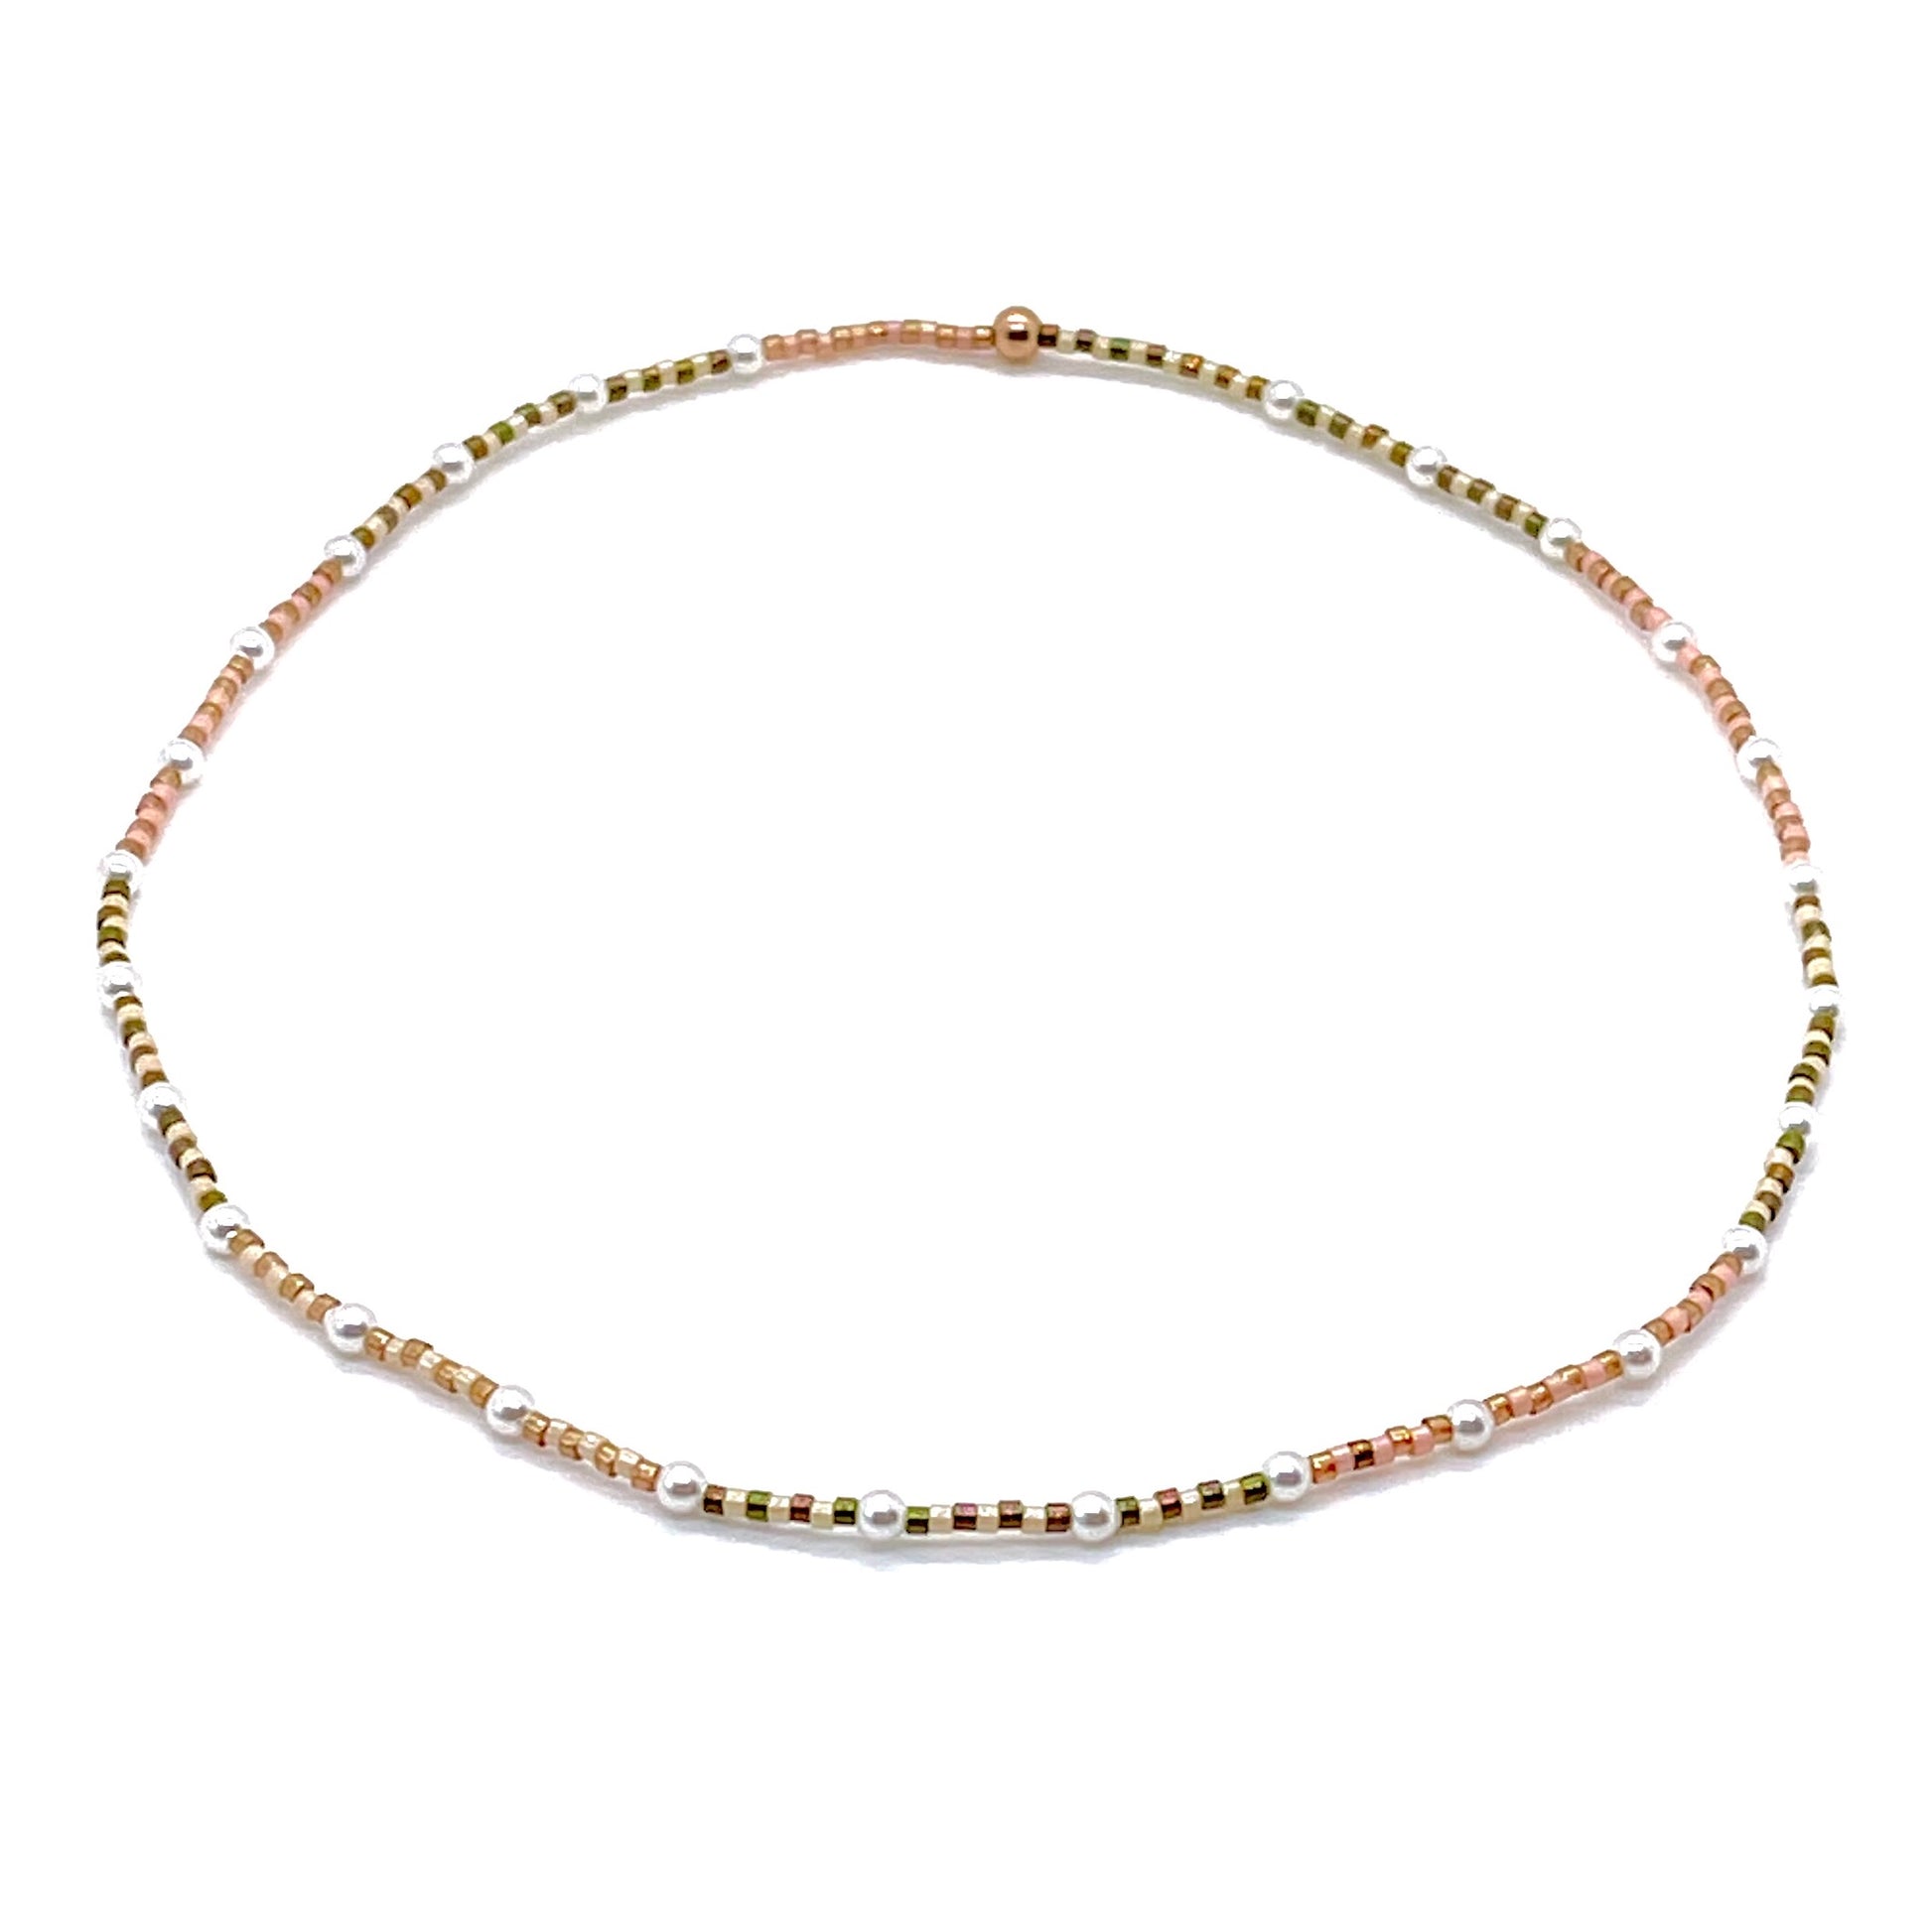 Pearl choker with pale peach and green seed beads on stretch cord. Dainty and soft pastel hues.